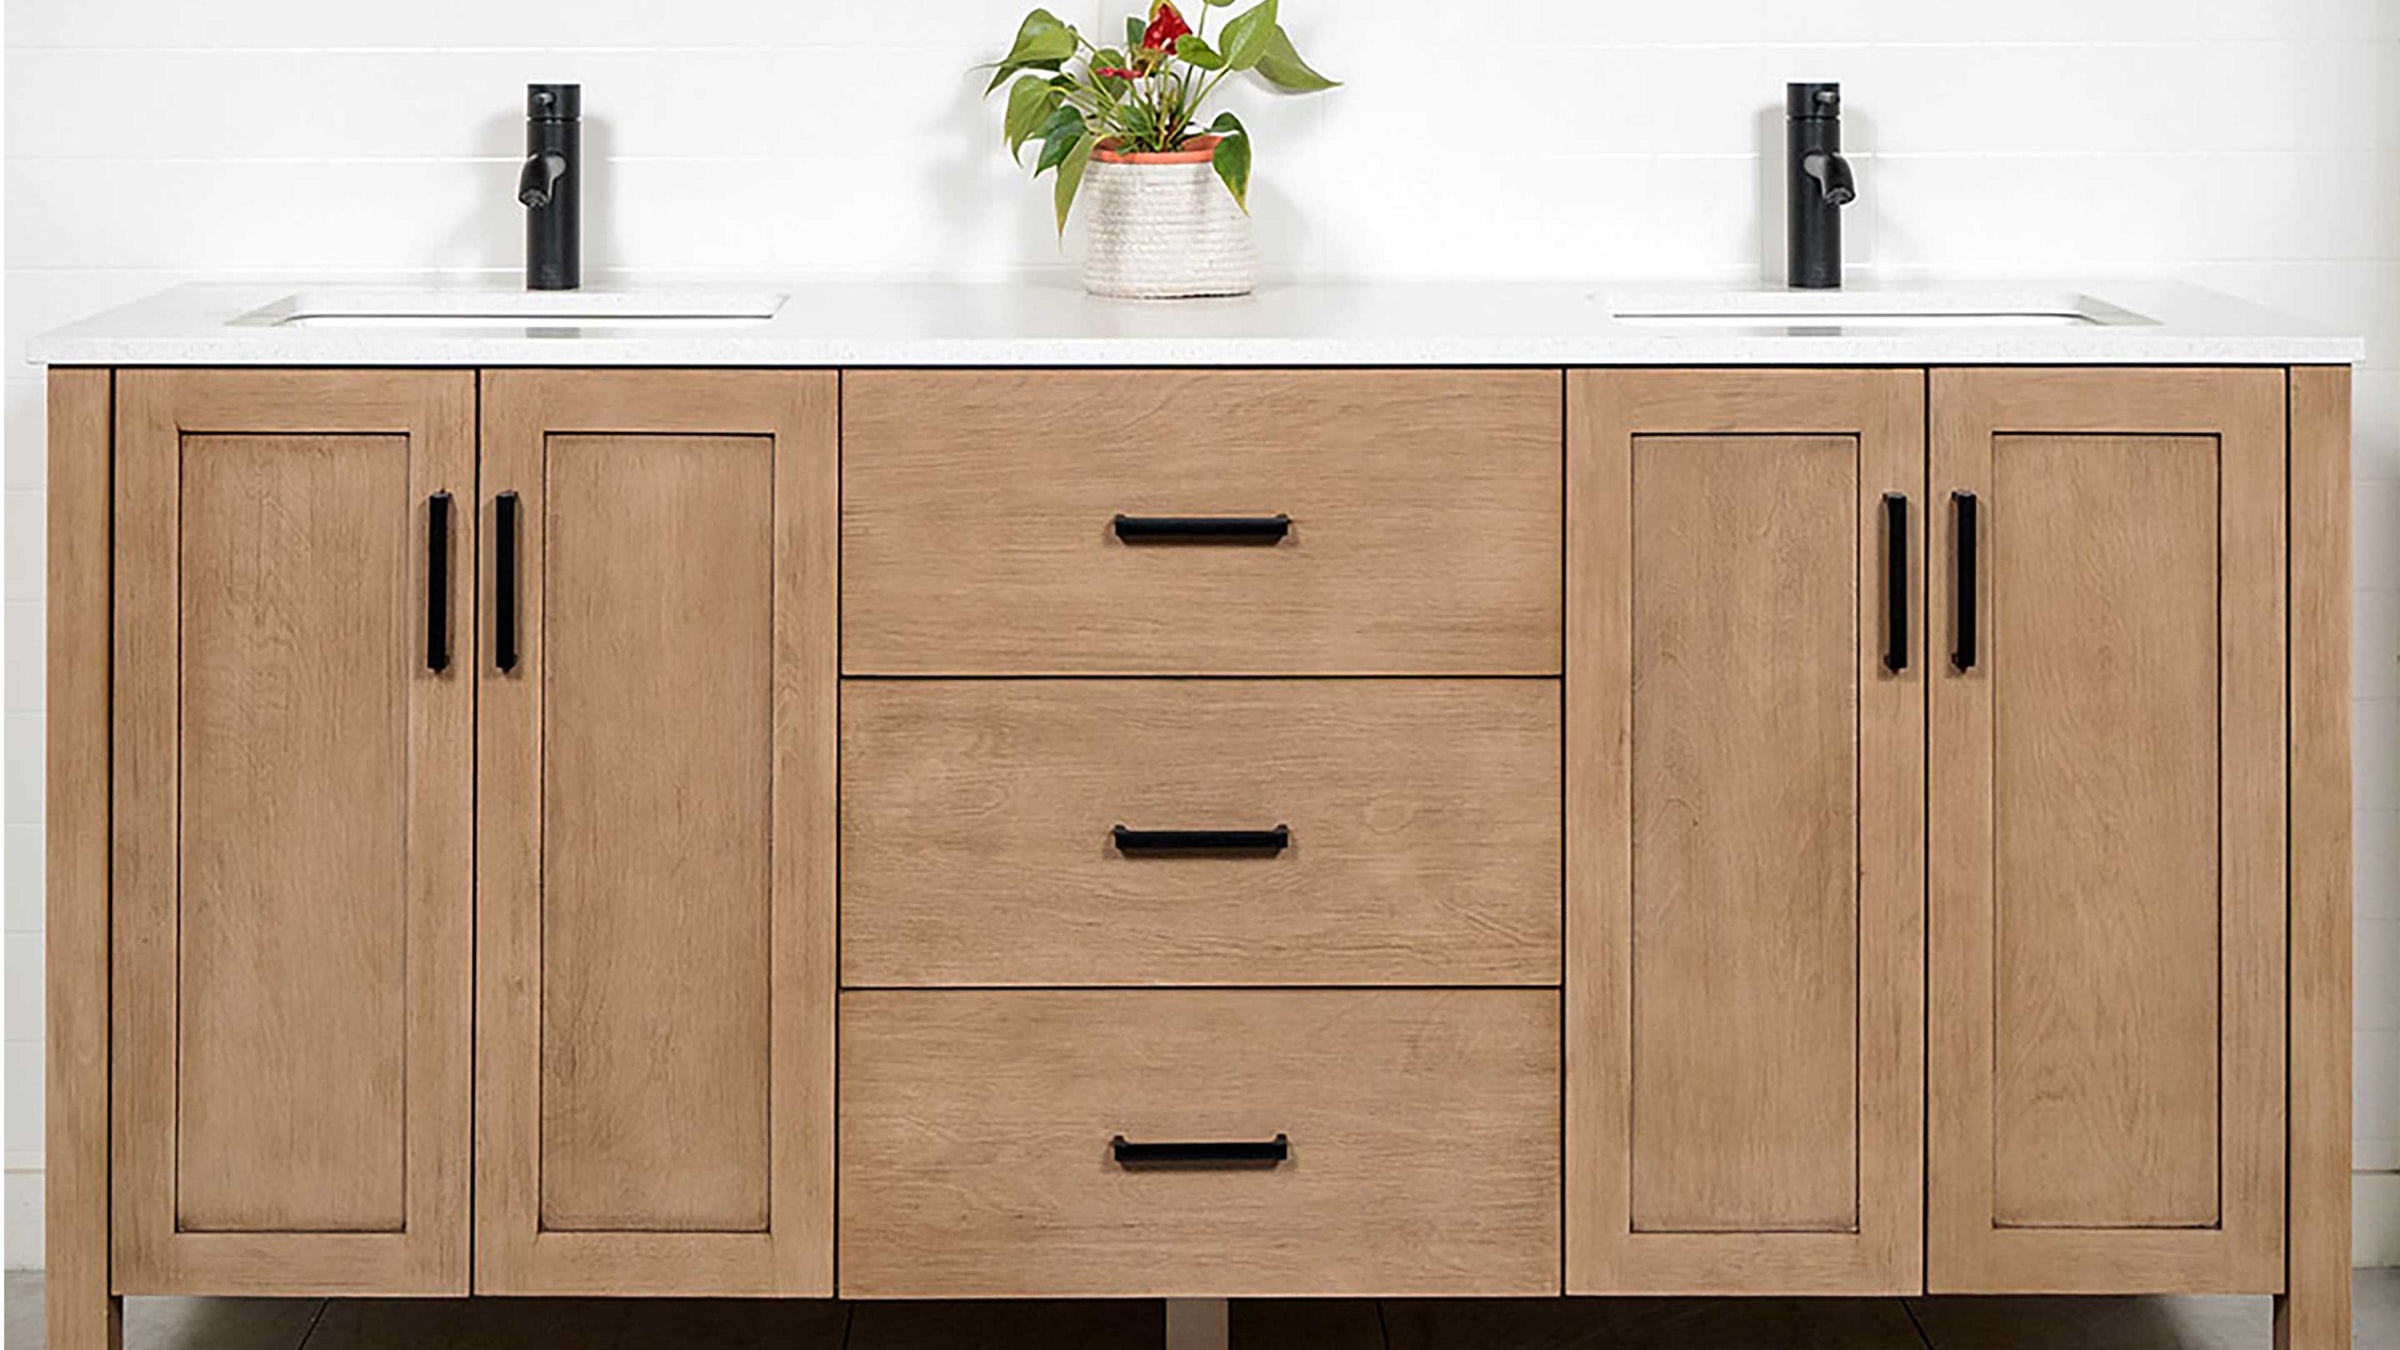 white oak double vanity 72 inches, white counter, black faucet and pulls